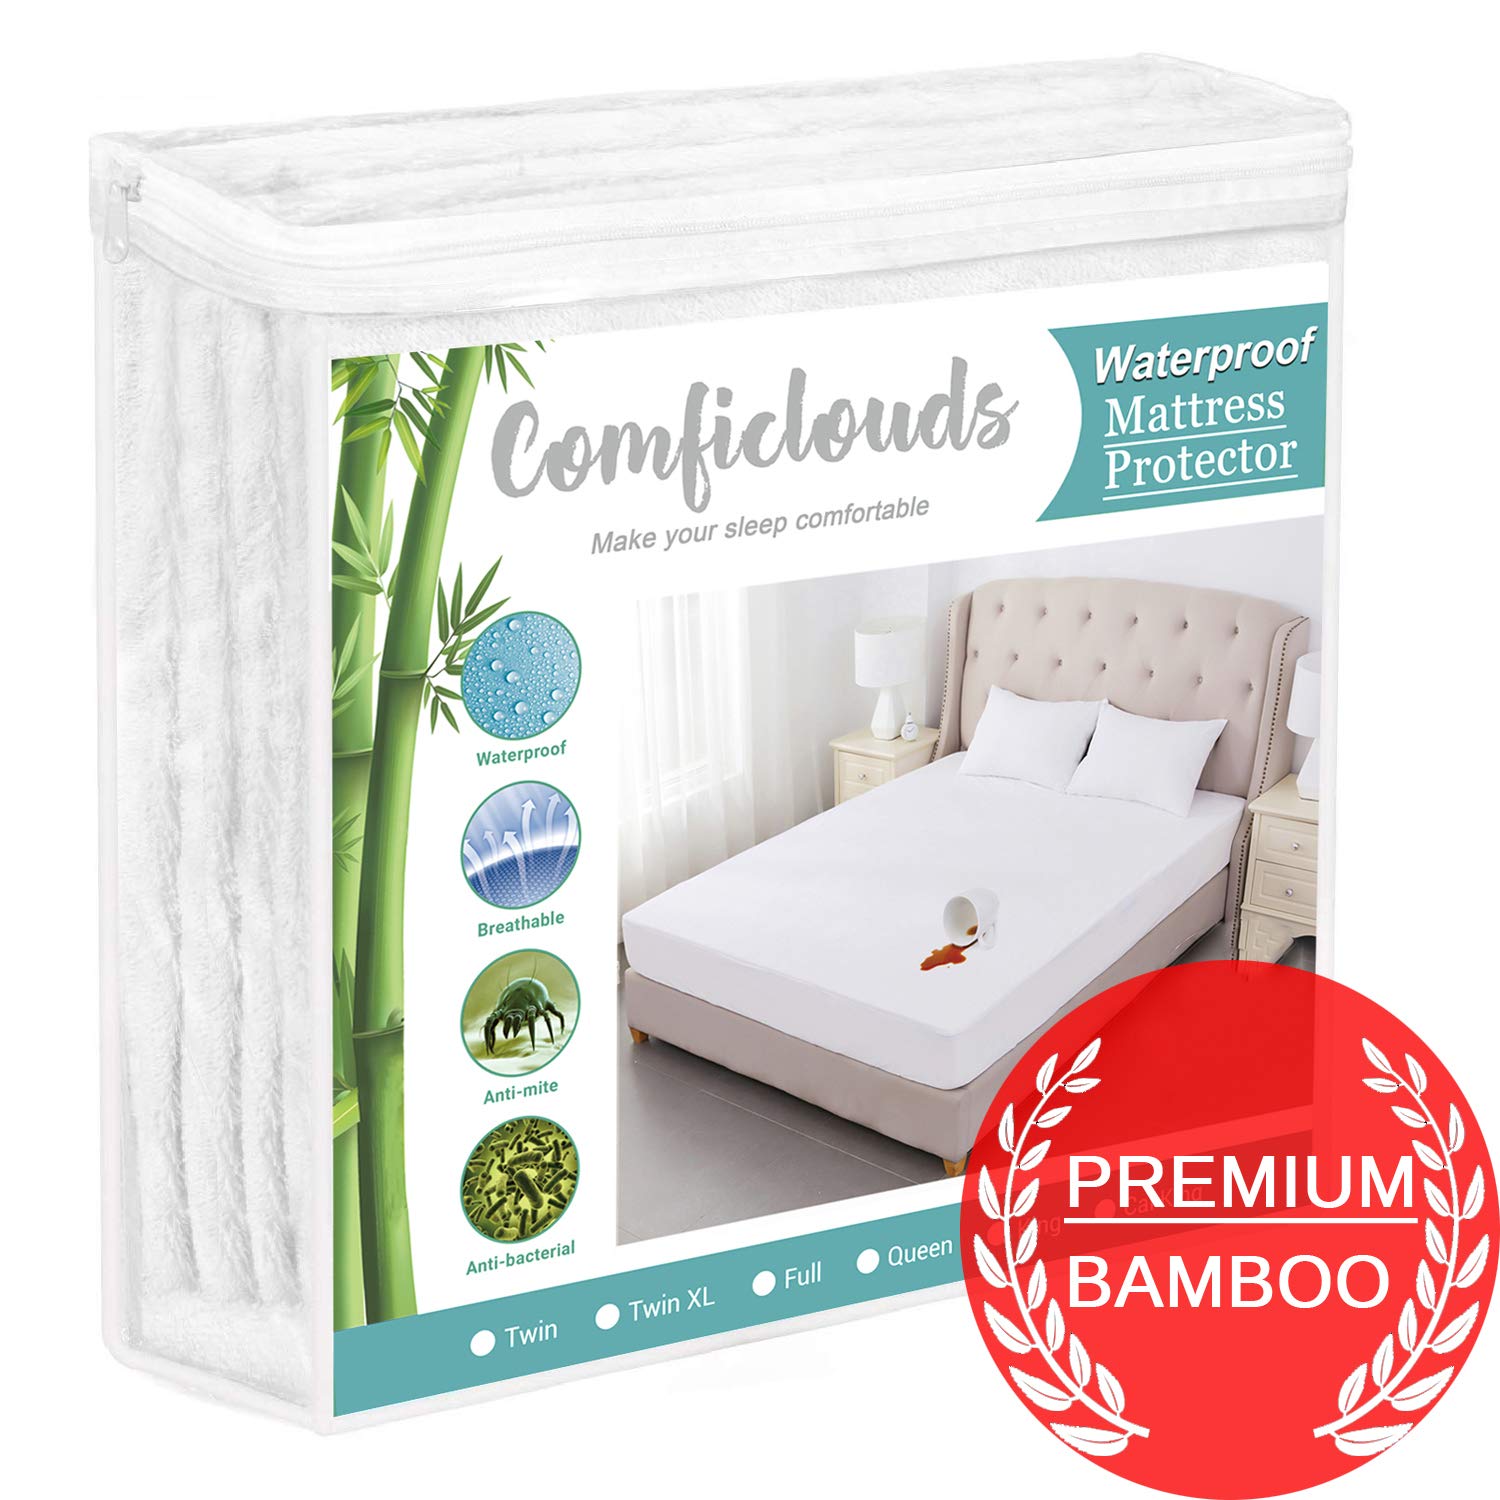 Bamboo Waterproof Mattress Protector Soft Queen Size Cover Comfortable Bed Pad 